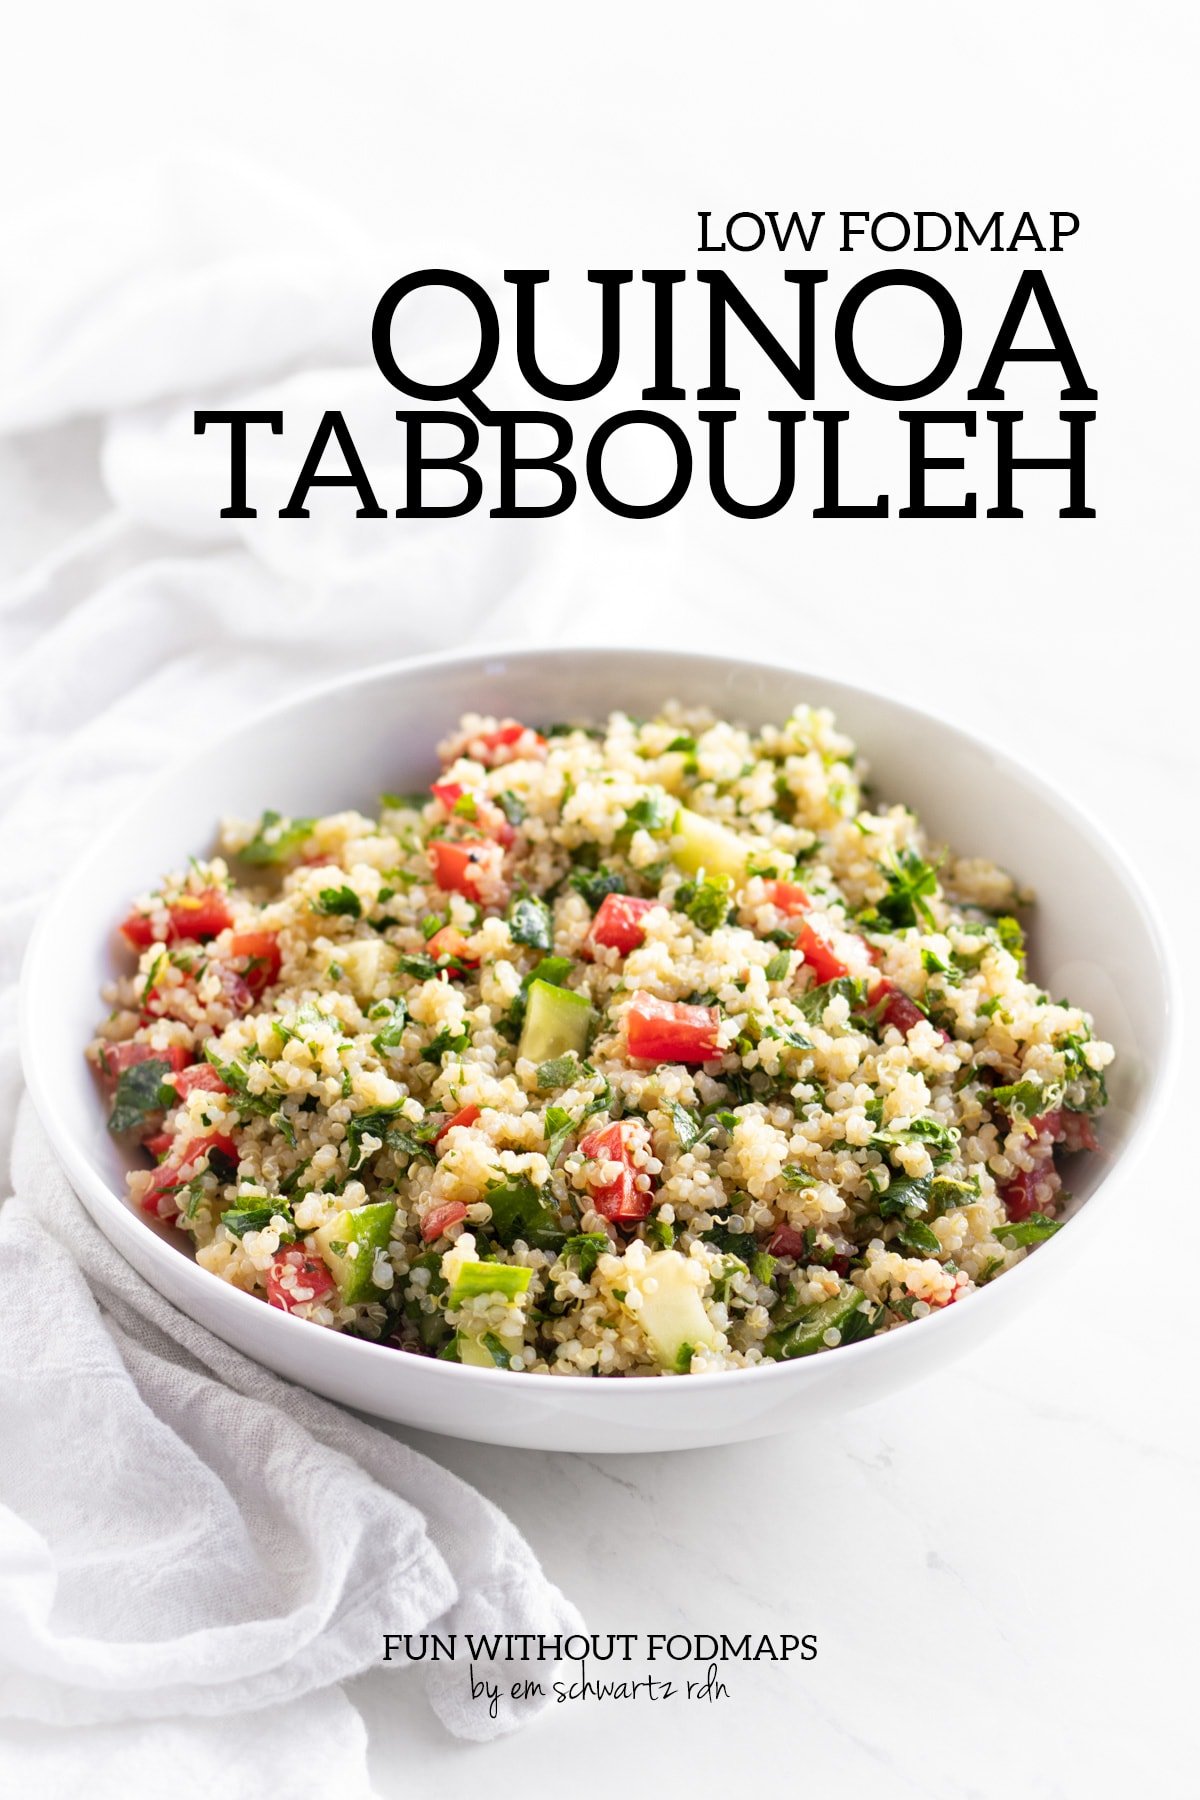 A shallow white bowl filled with a mixture of quinoa, tomato, cucumber, and fresh herbs. The bowl sits on a white marble background with a white cloth napkin on the side. A black text overlay reads Low FODMAP Quinoa Tabbouleh